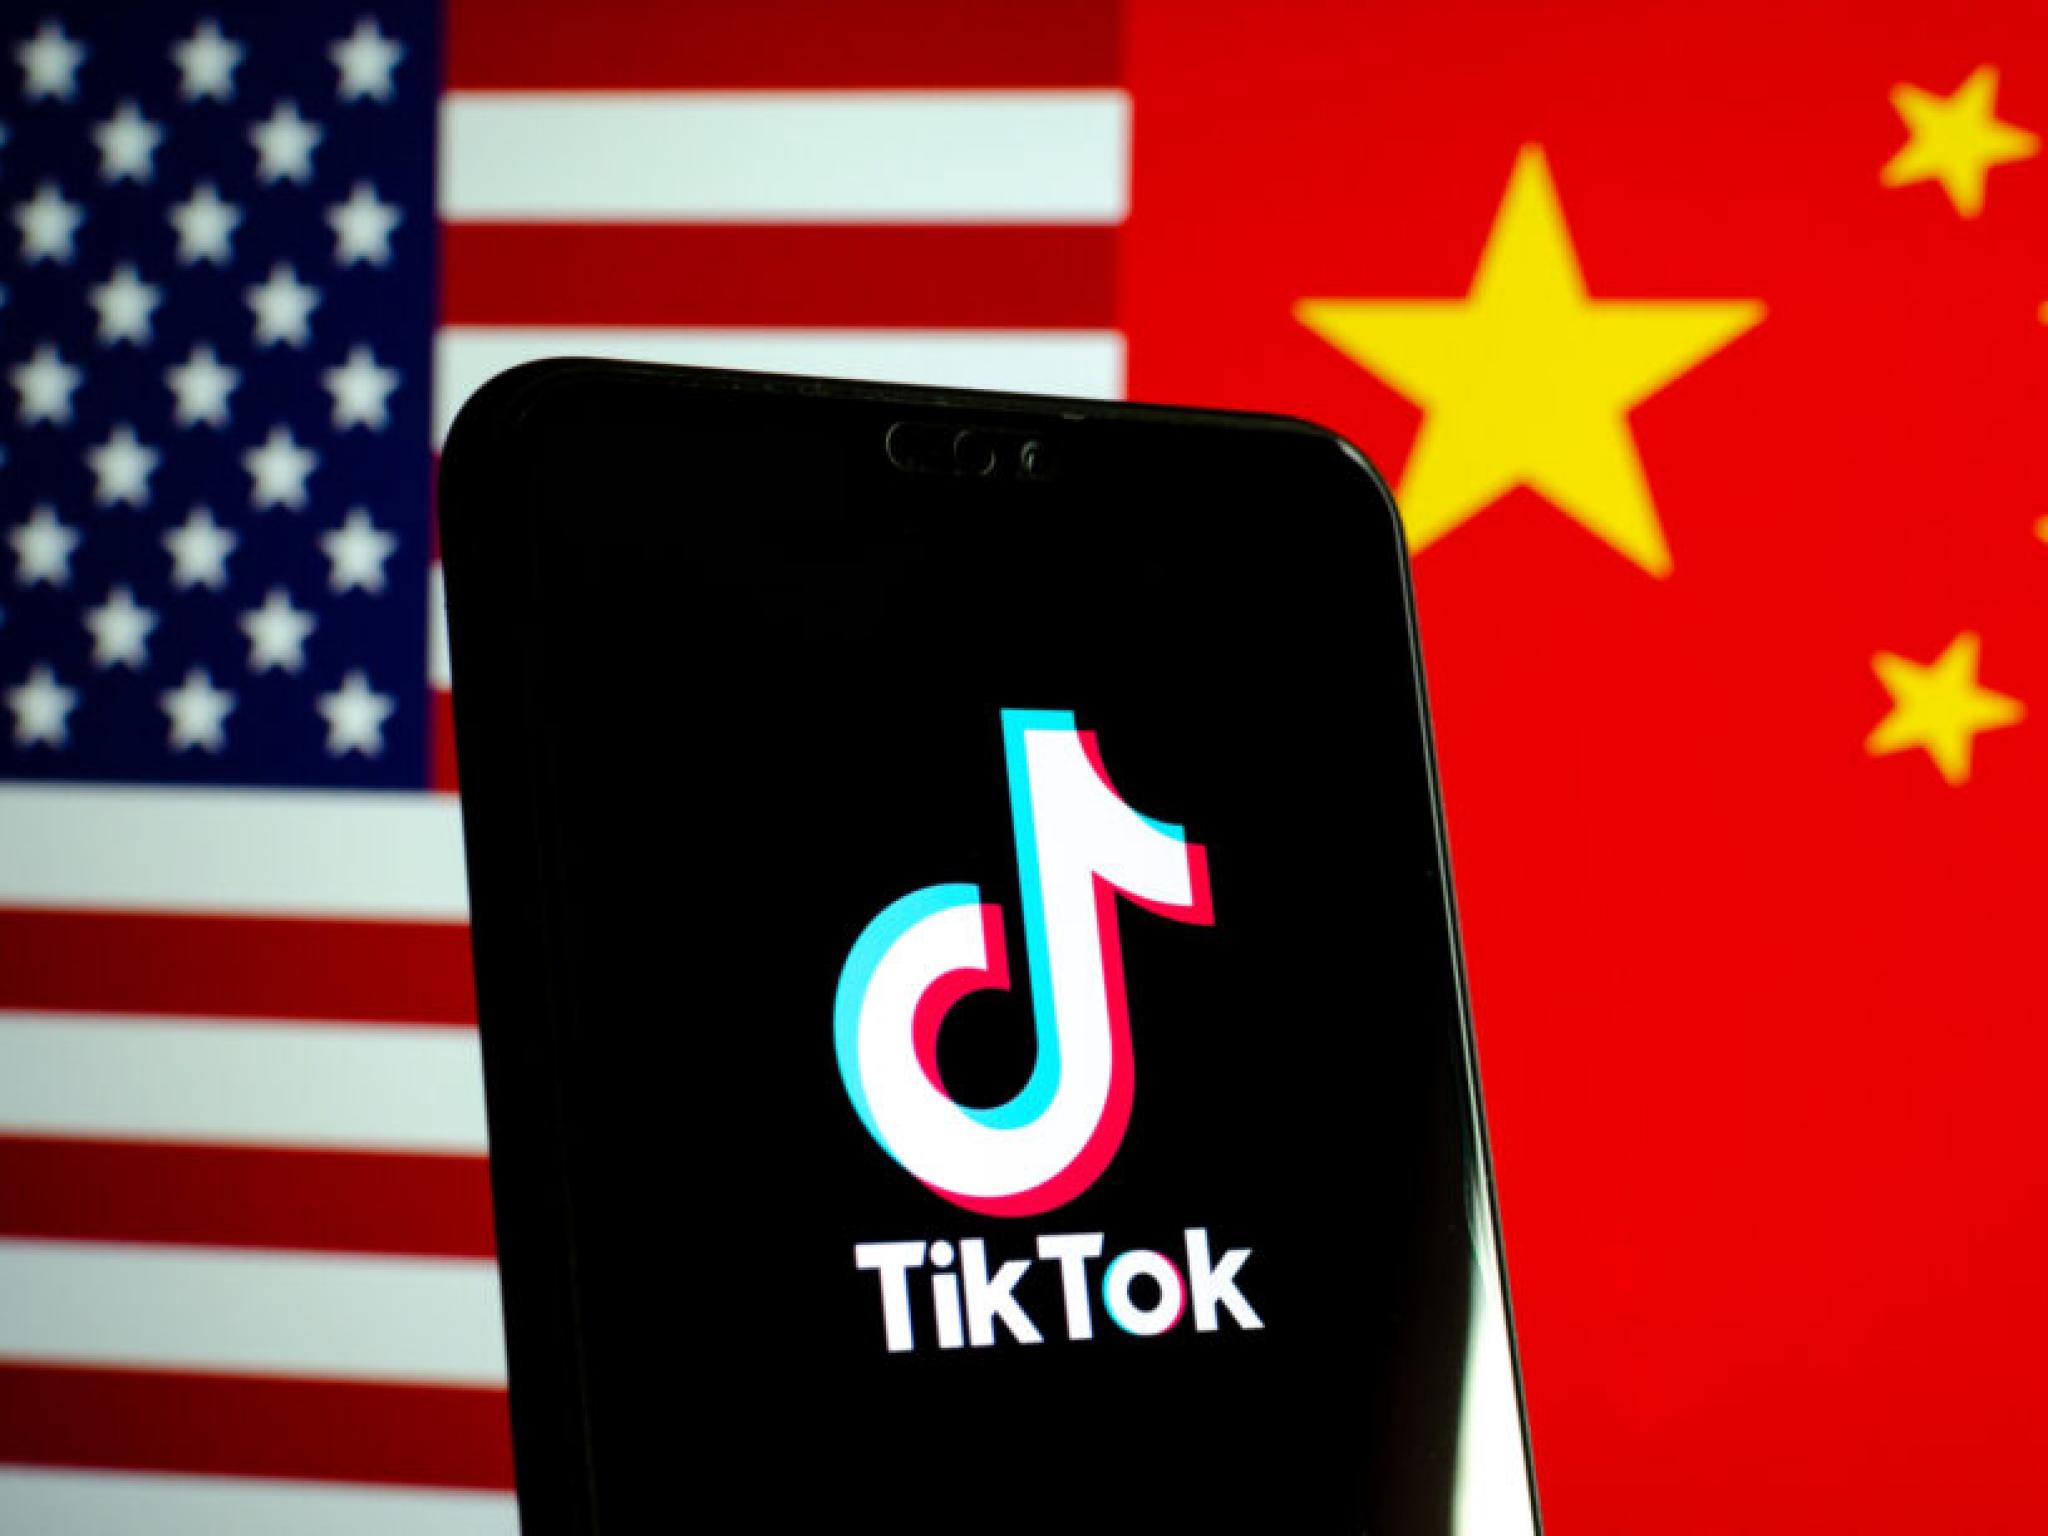  tiktok-ban-courts-must-decide-whether-national-security-concerns-trump-freedom-of-expression 